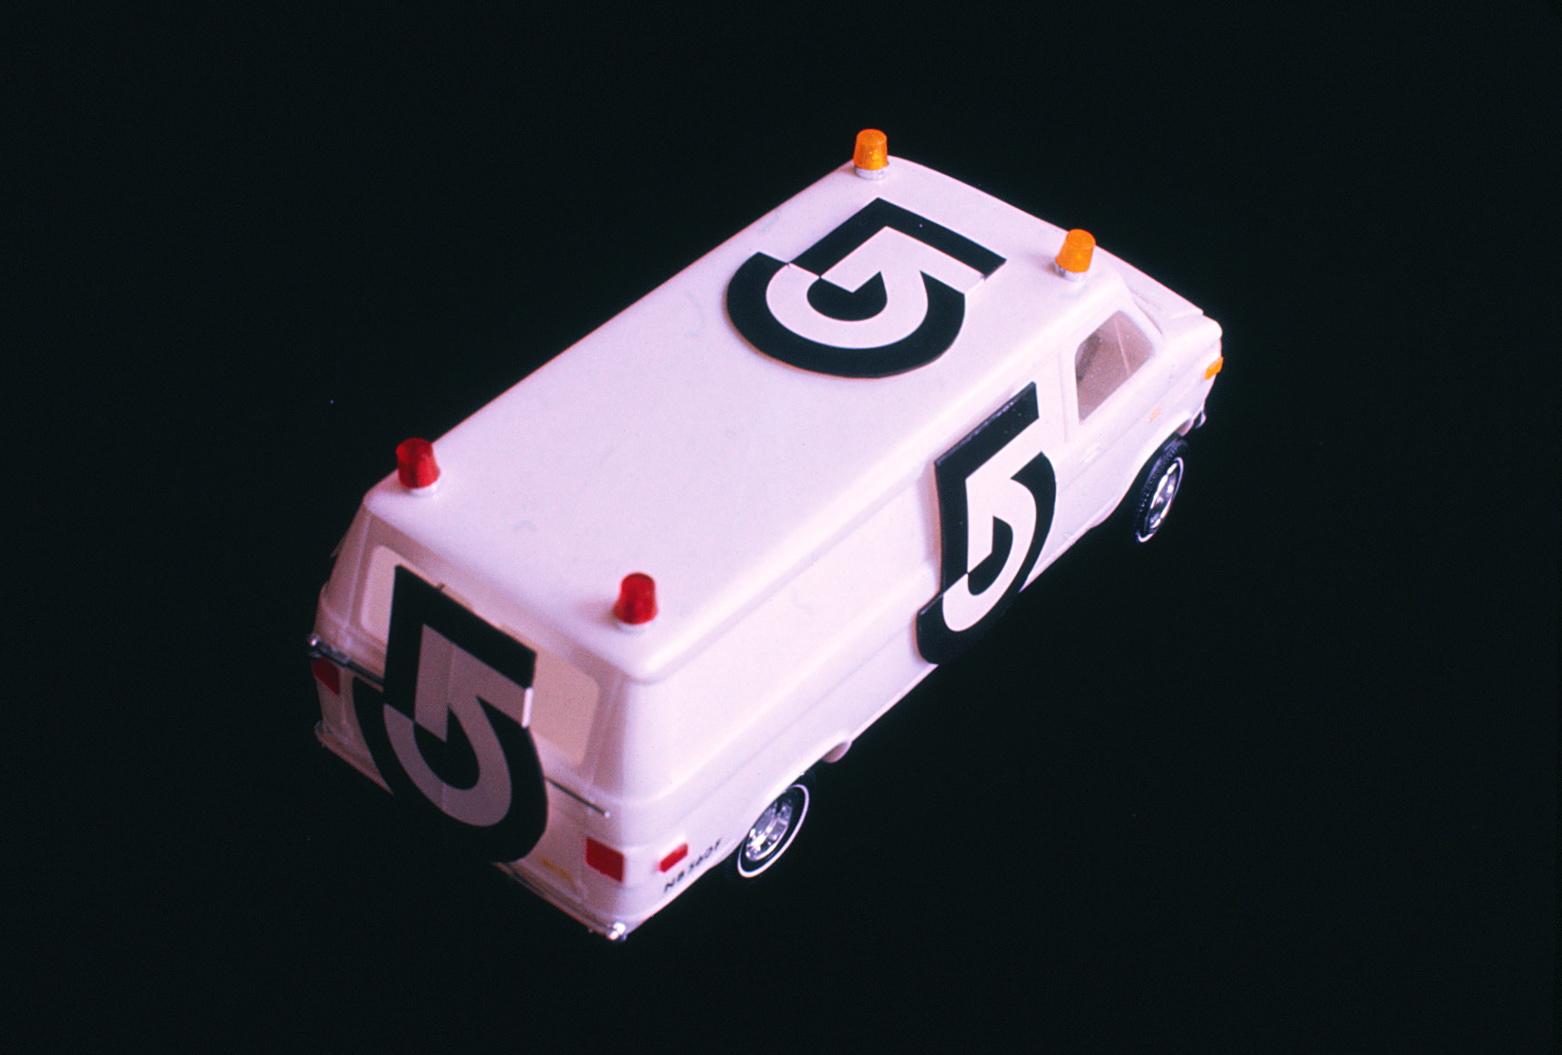 Model of van with logo on sides, back and roof